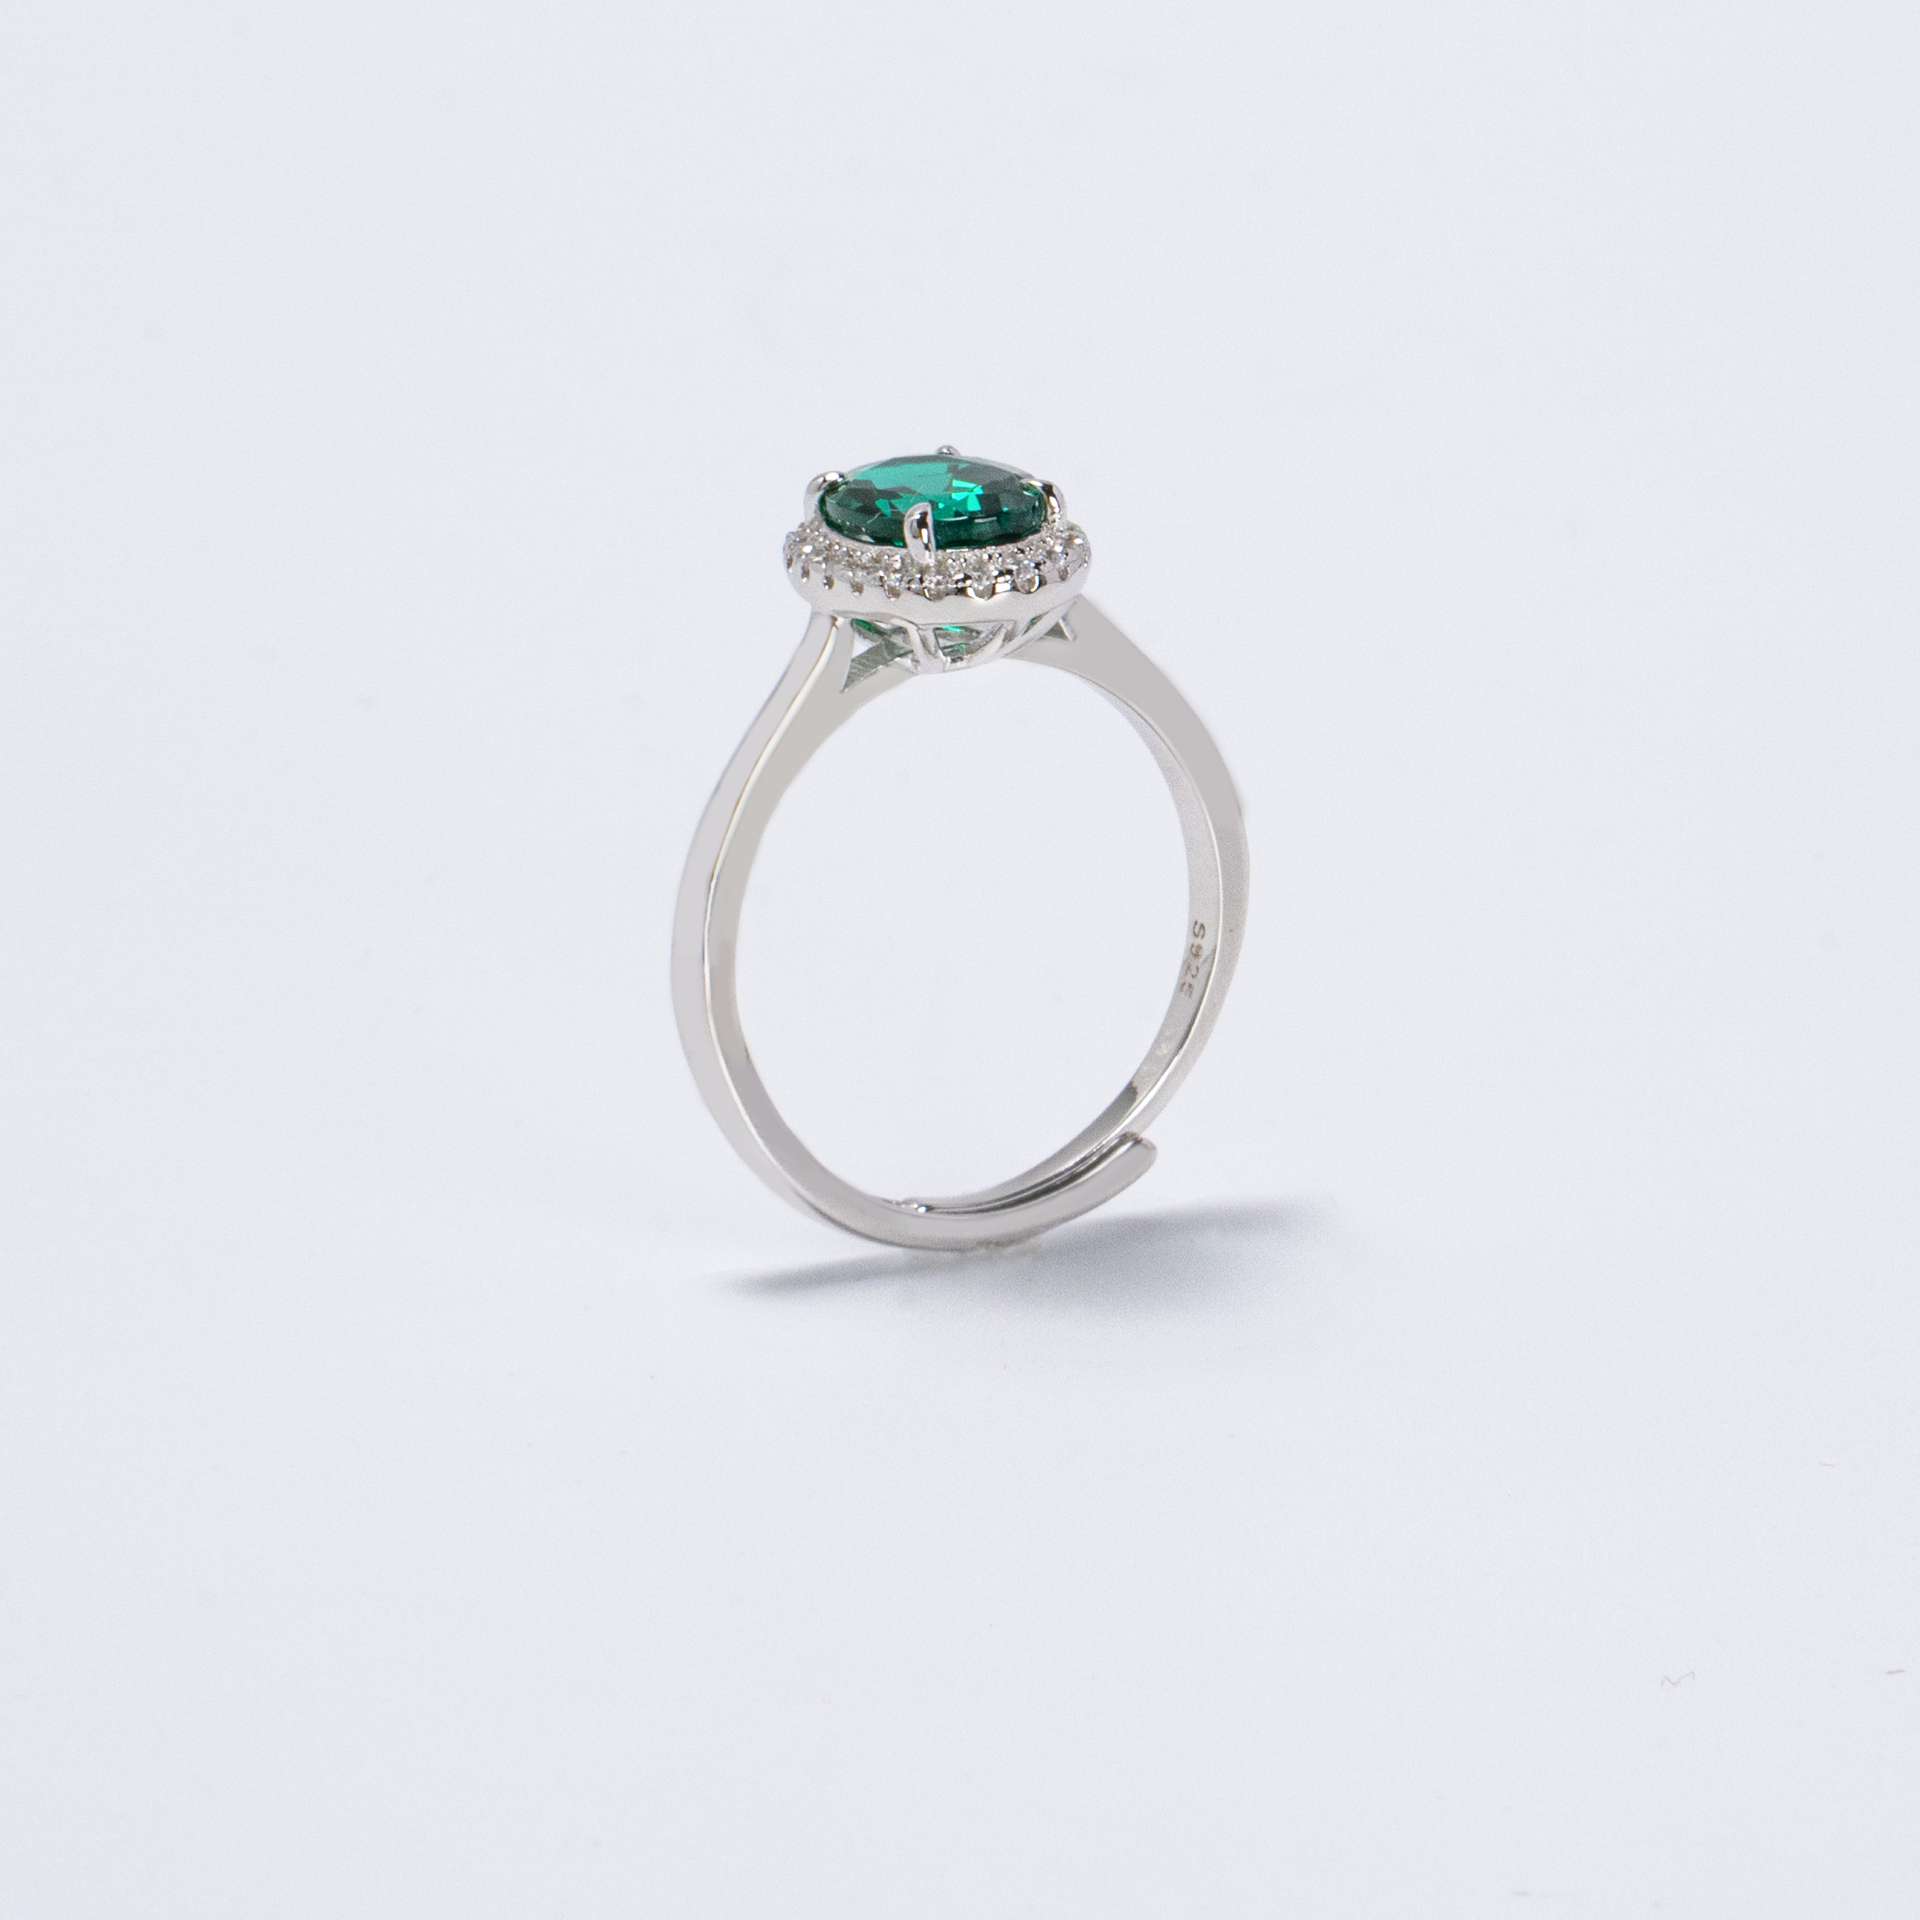 1.5CT Synthetic Emerald Oval Cushion Cut Ring